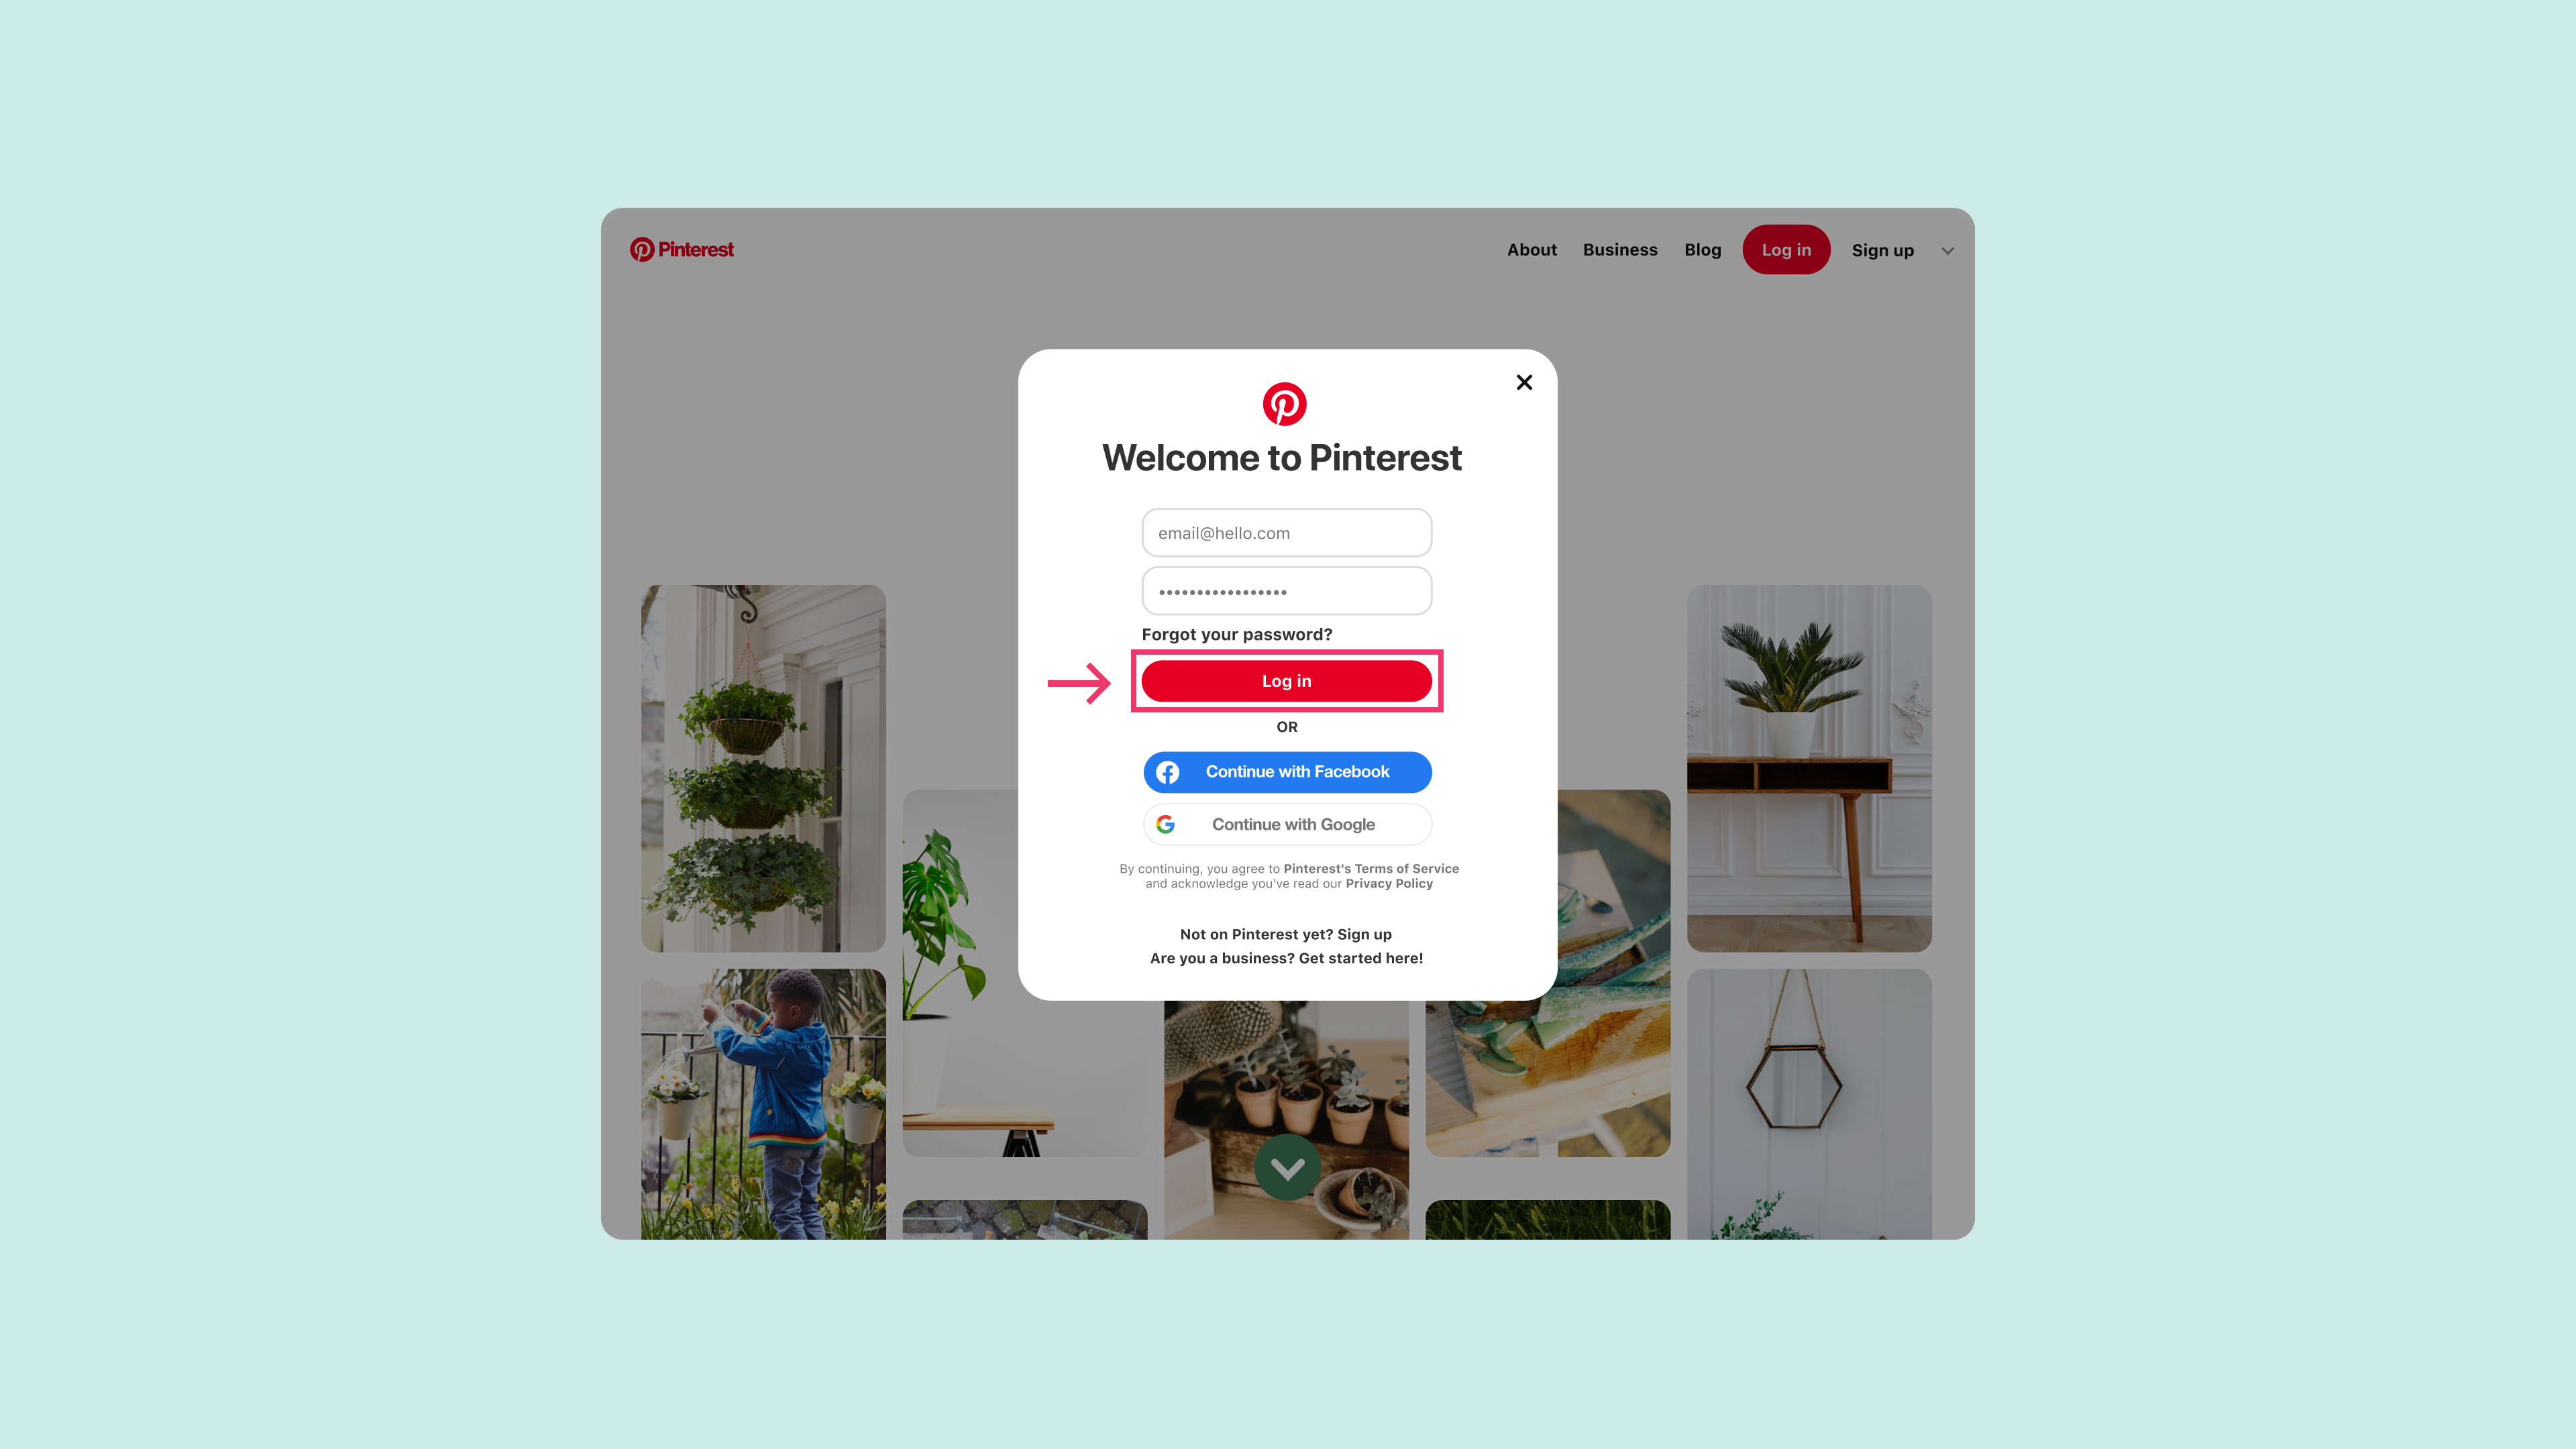 A red arrow pointing to the red 'Log in' button to log in to Pinterest.